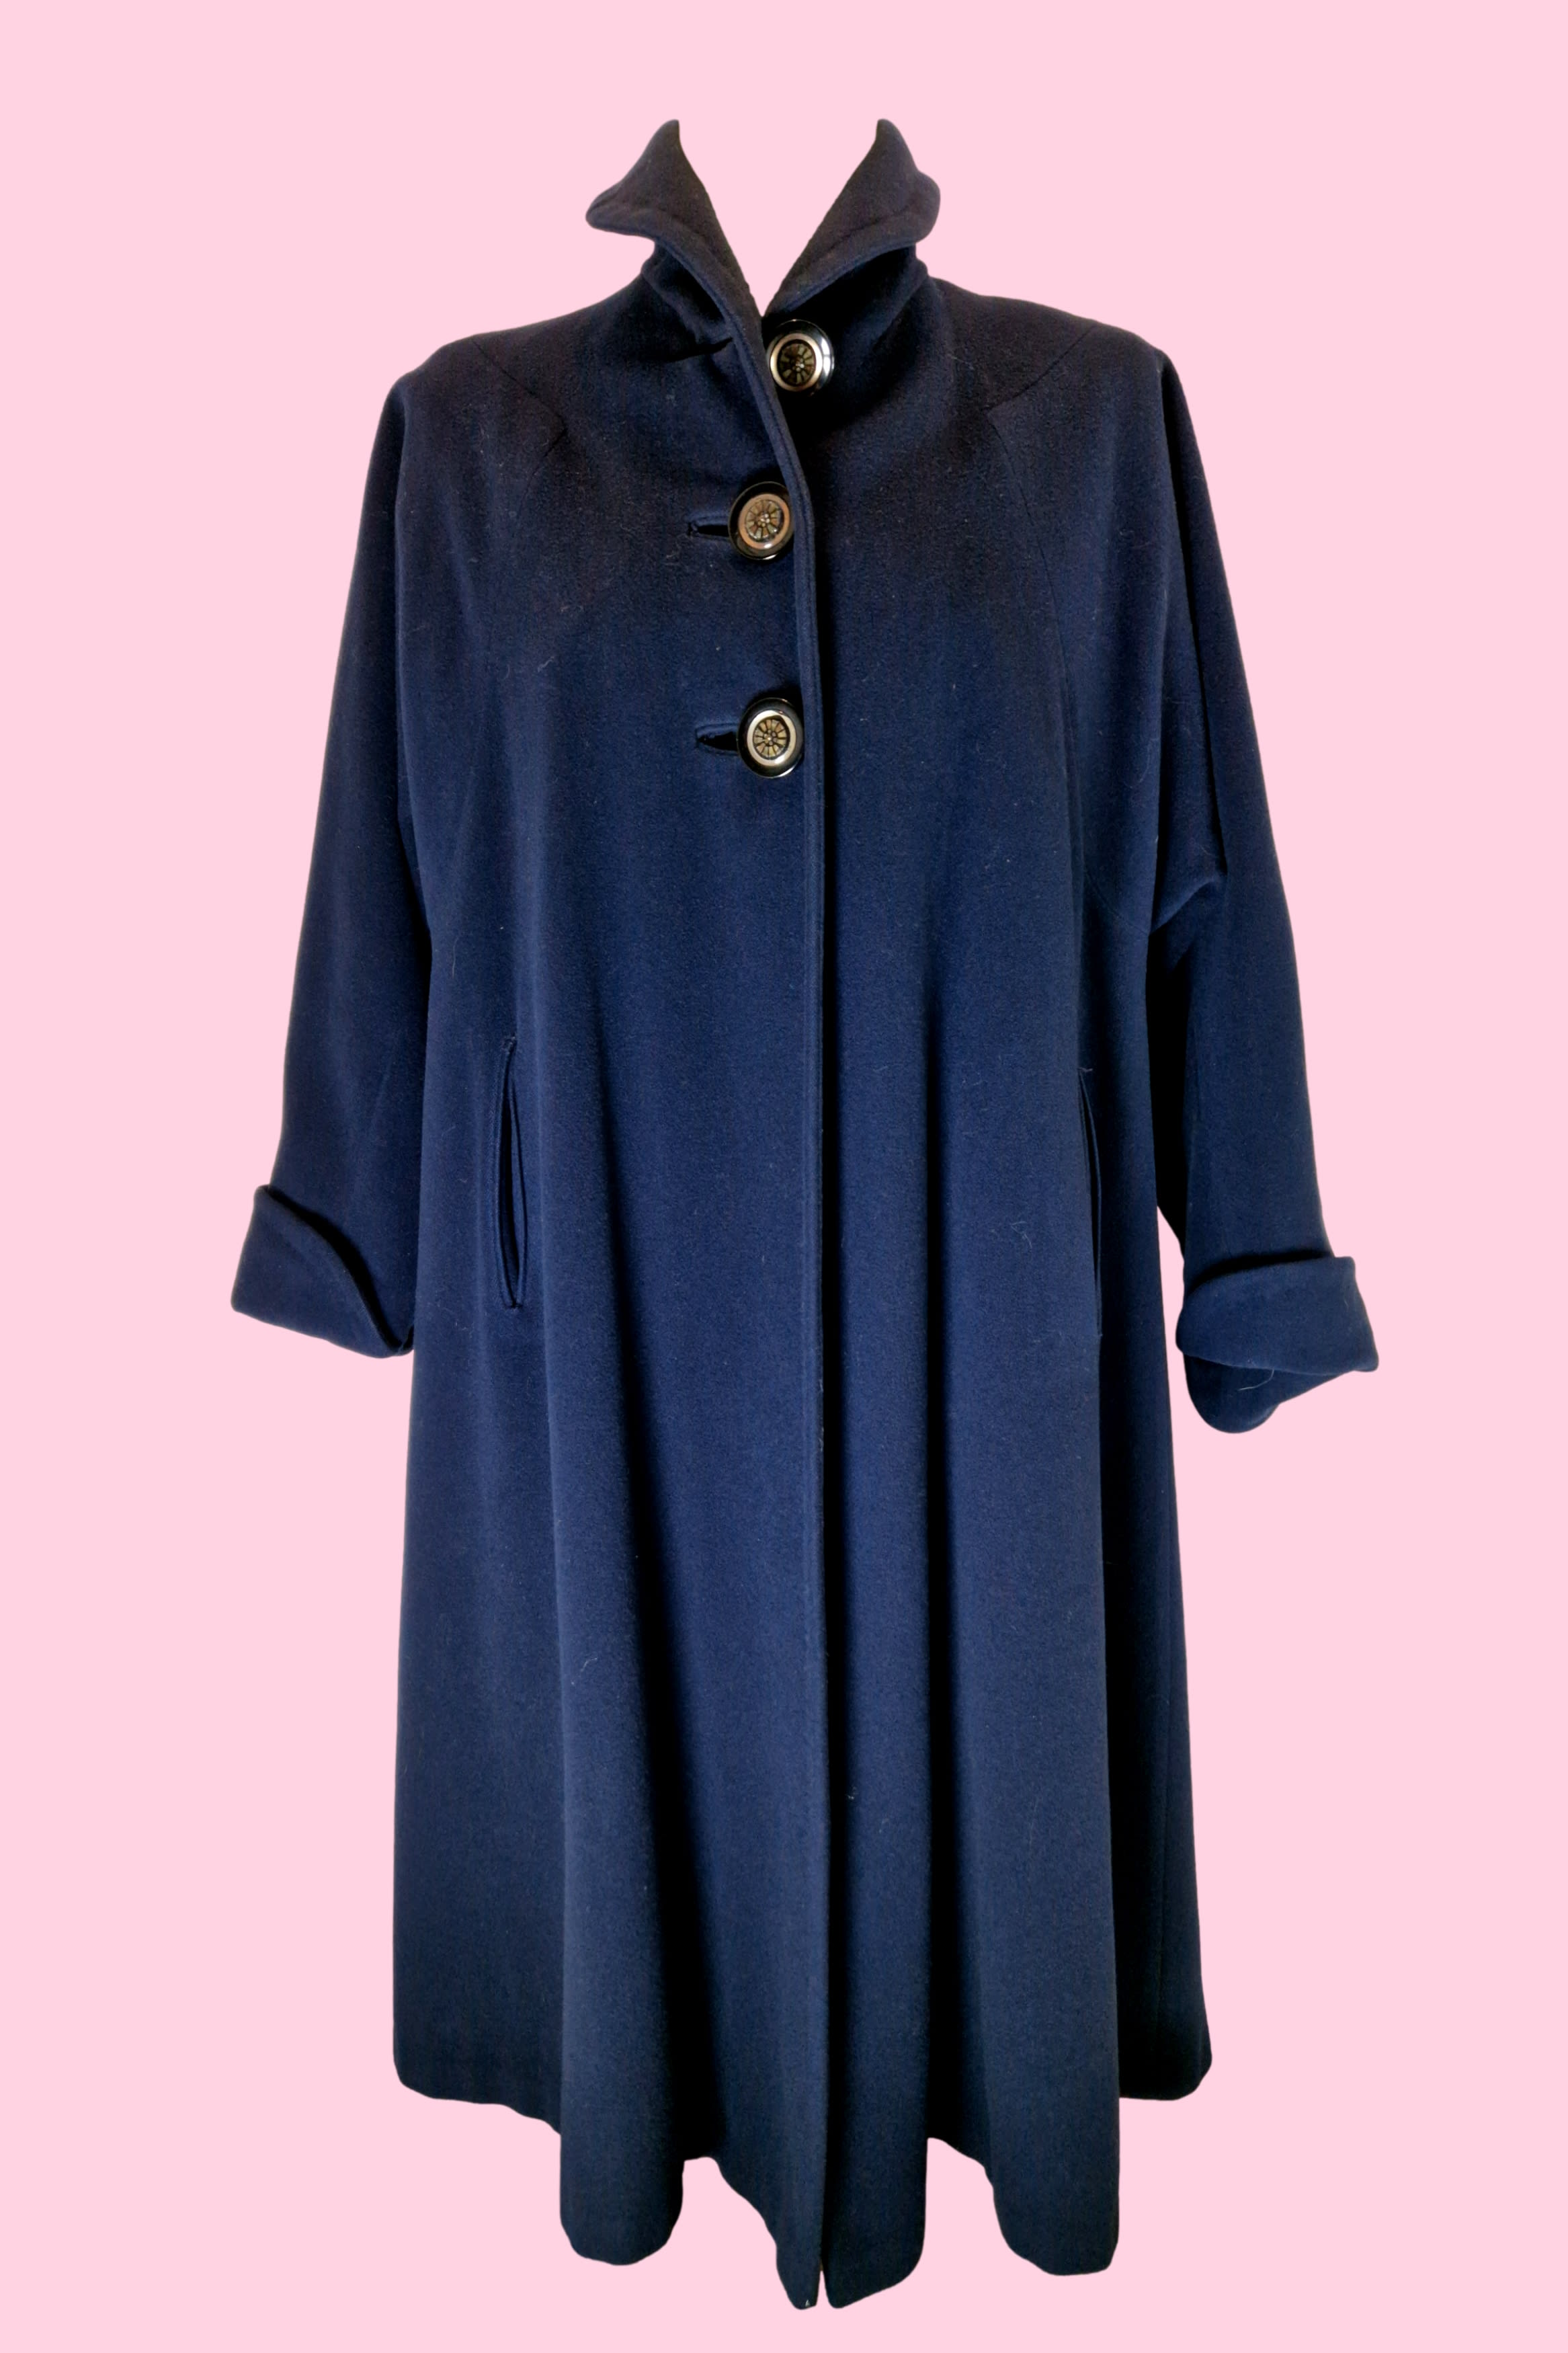 1950's Blue Wool Vintage Swing Coat - Jackets, Coats and Suits - Space ...